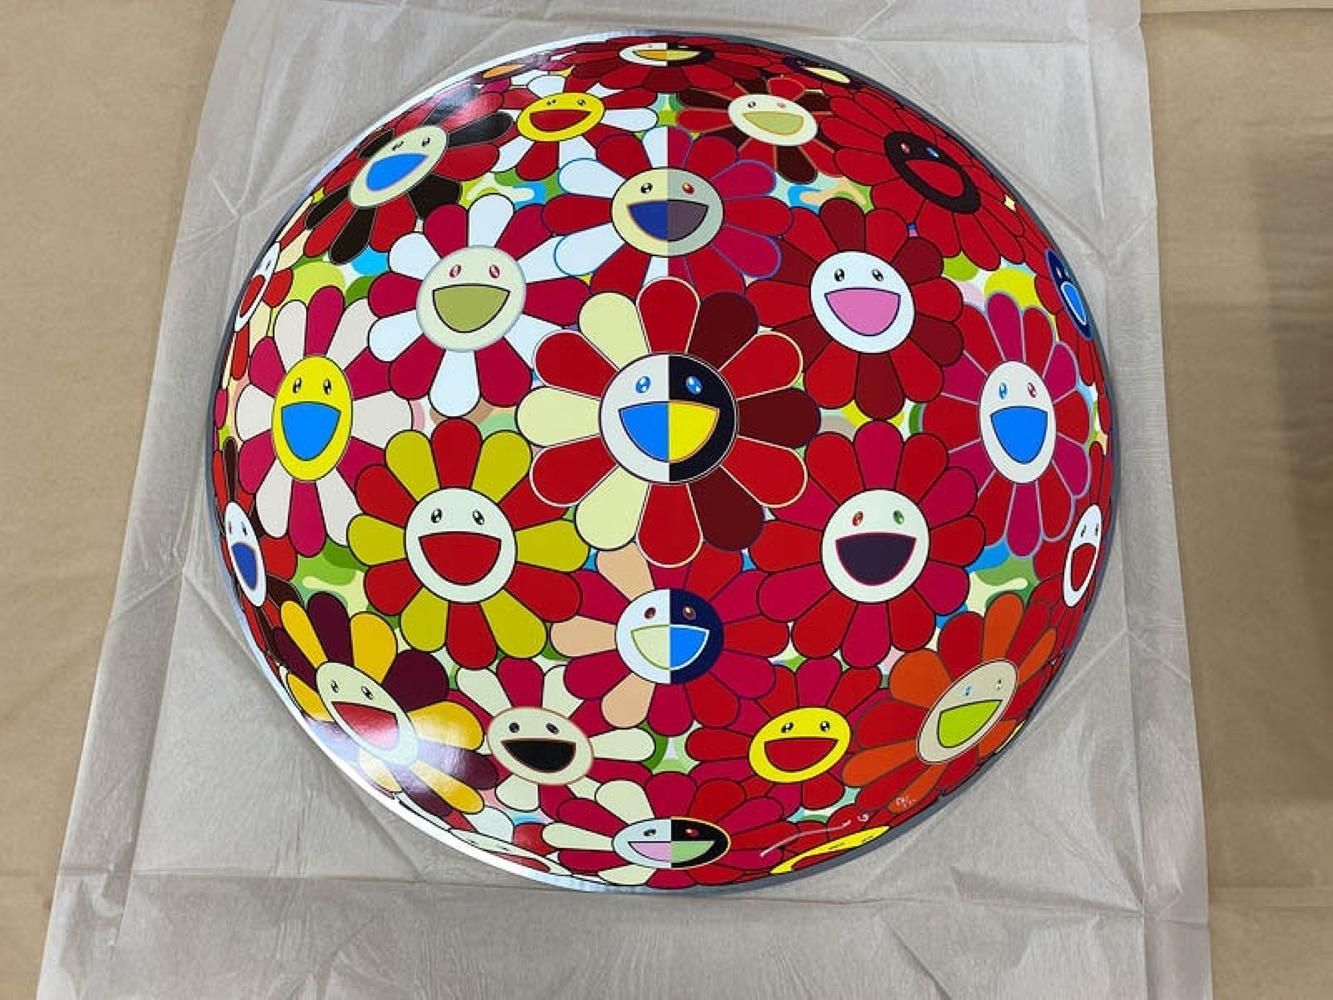 Flower Ball (3-D) Magic Flute, 2011 by Takashi Murakami
Woven paper, four-color offset print, cold foil stamp, glossy varnish
Published by Kaikai Kiki Co., Ltd., Tokyo
28 in diameter
71 cm diameter
Edition 54/300

Takashi Murakami is best known for